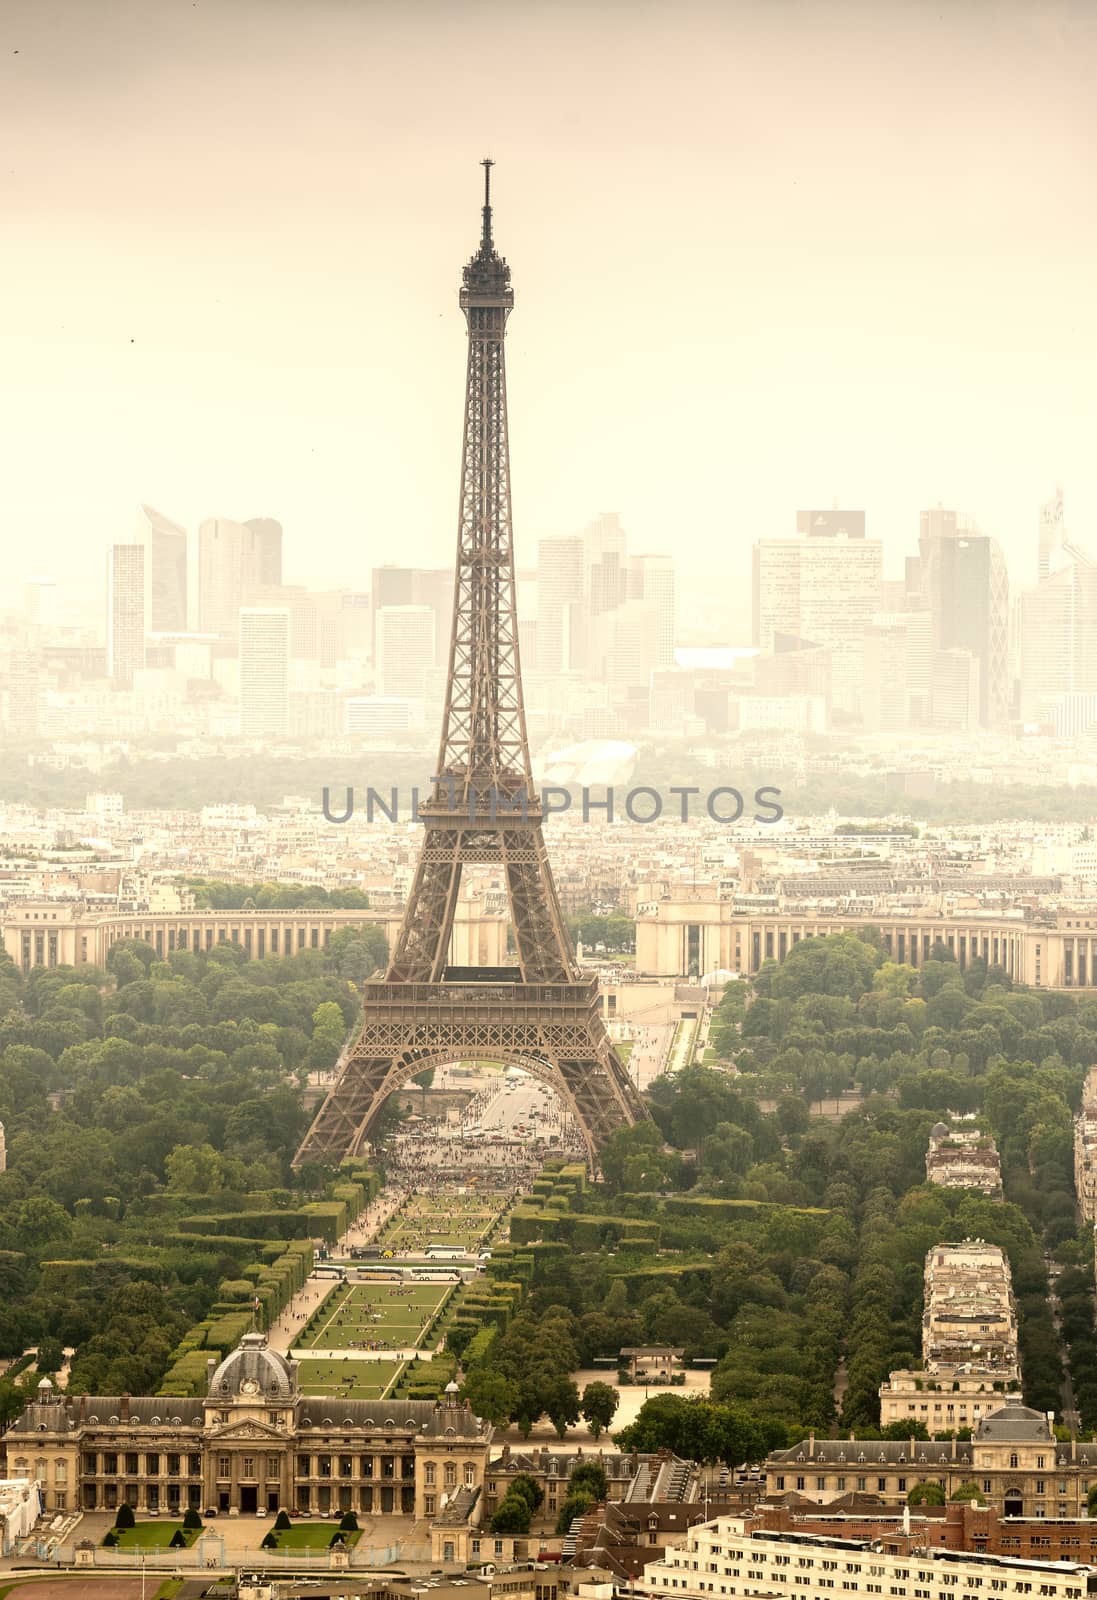 Beautiful view of Tour Eiffel. The Eiffel Tower in Paris, France.